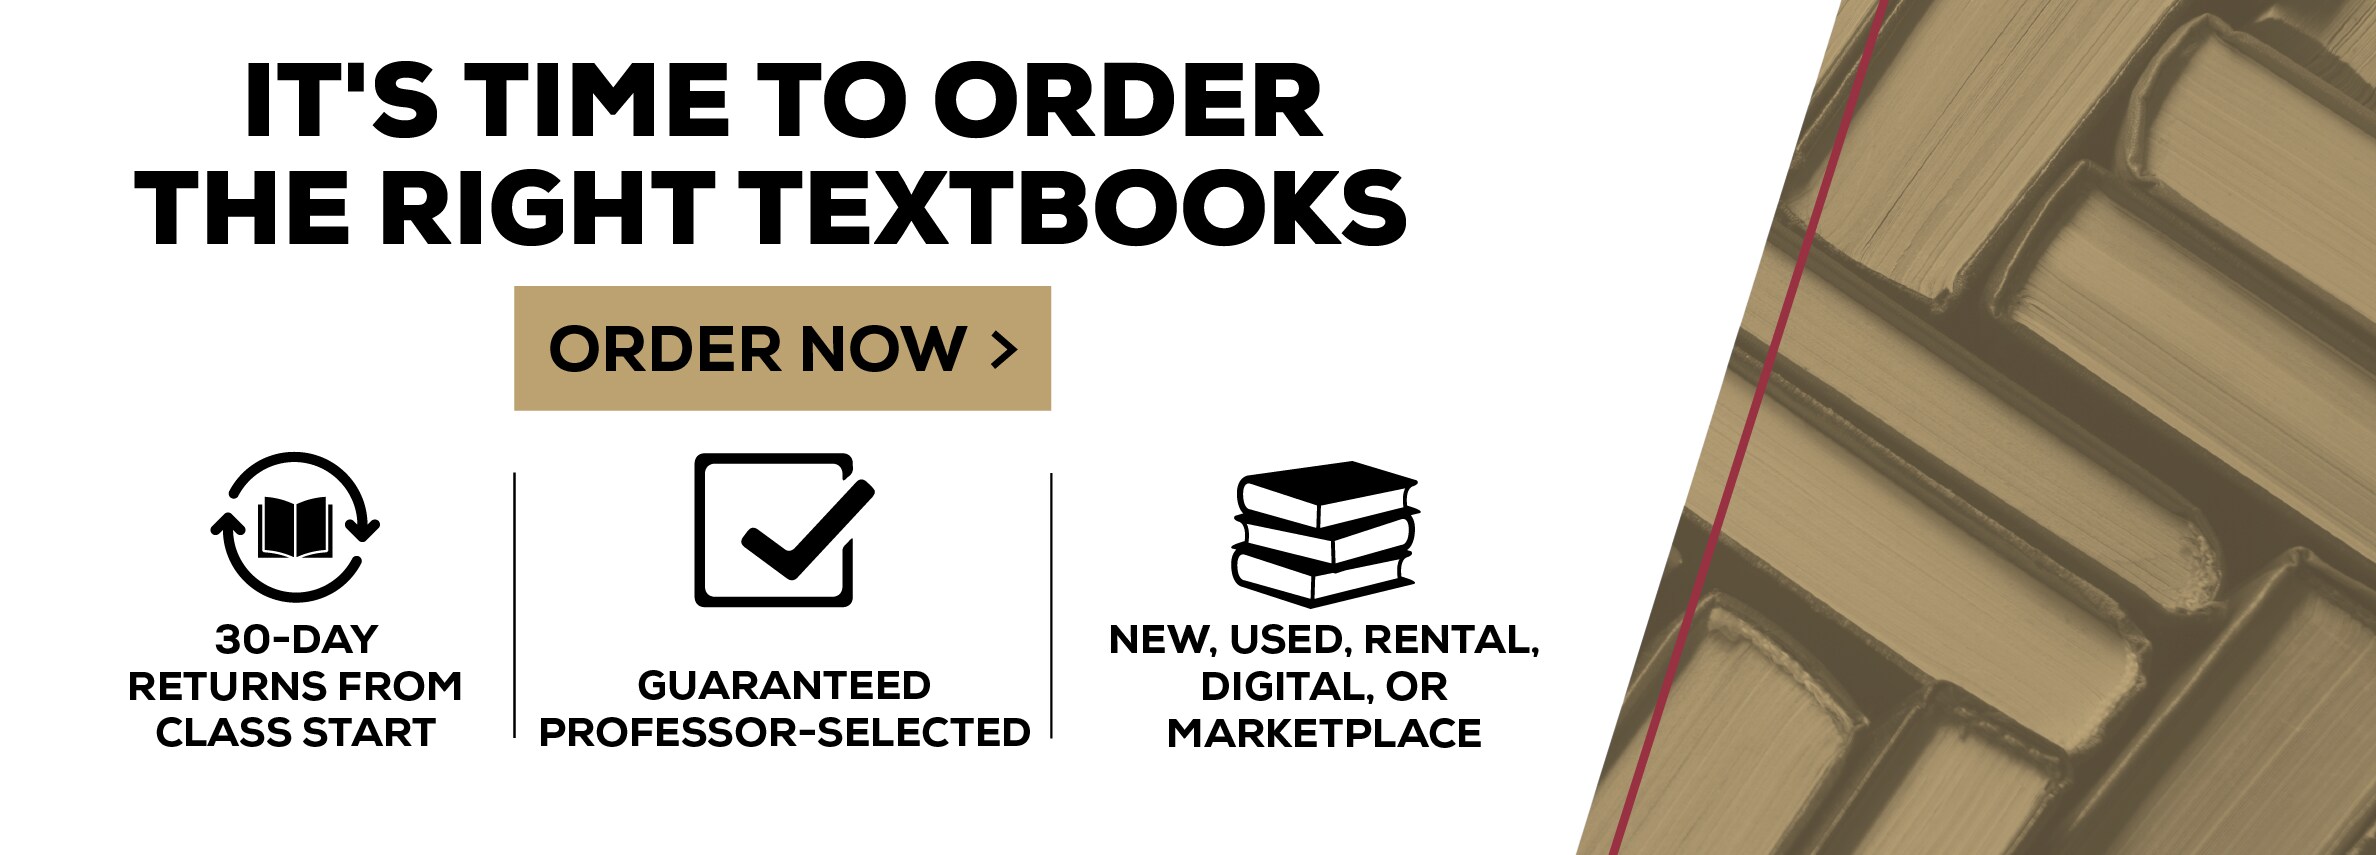 IT'S TIME TO ORDER THE RIGHT TEXTBOOKS! ORDER NOW. 30-DAY RETURNS FROM CLASS START. GUARANTEED PROFESSOR-SELECTED. NEW, USED, RENTAL DIGITAL, OR MARKETPLACE.